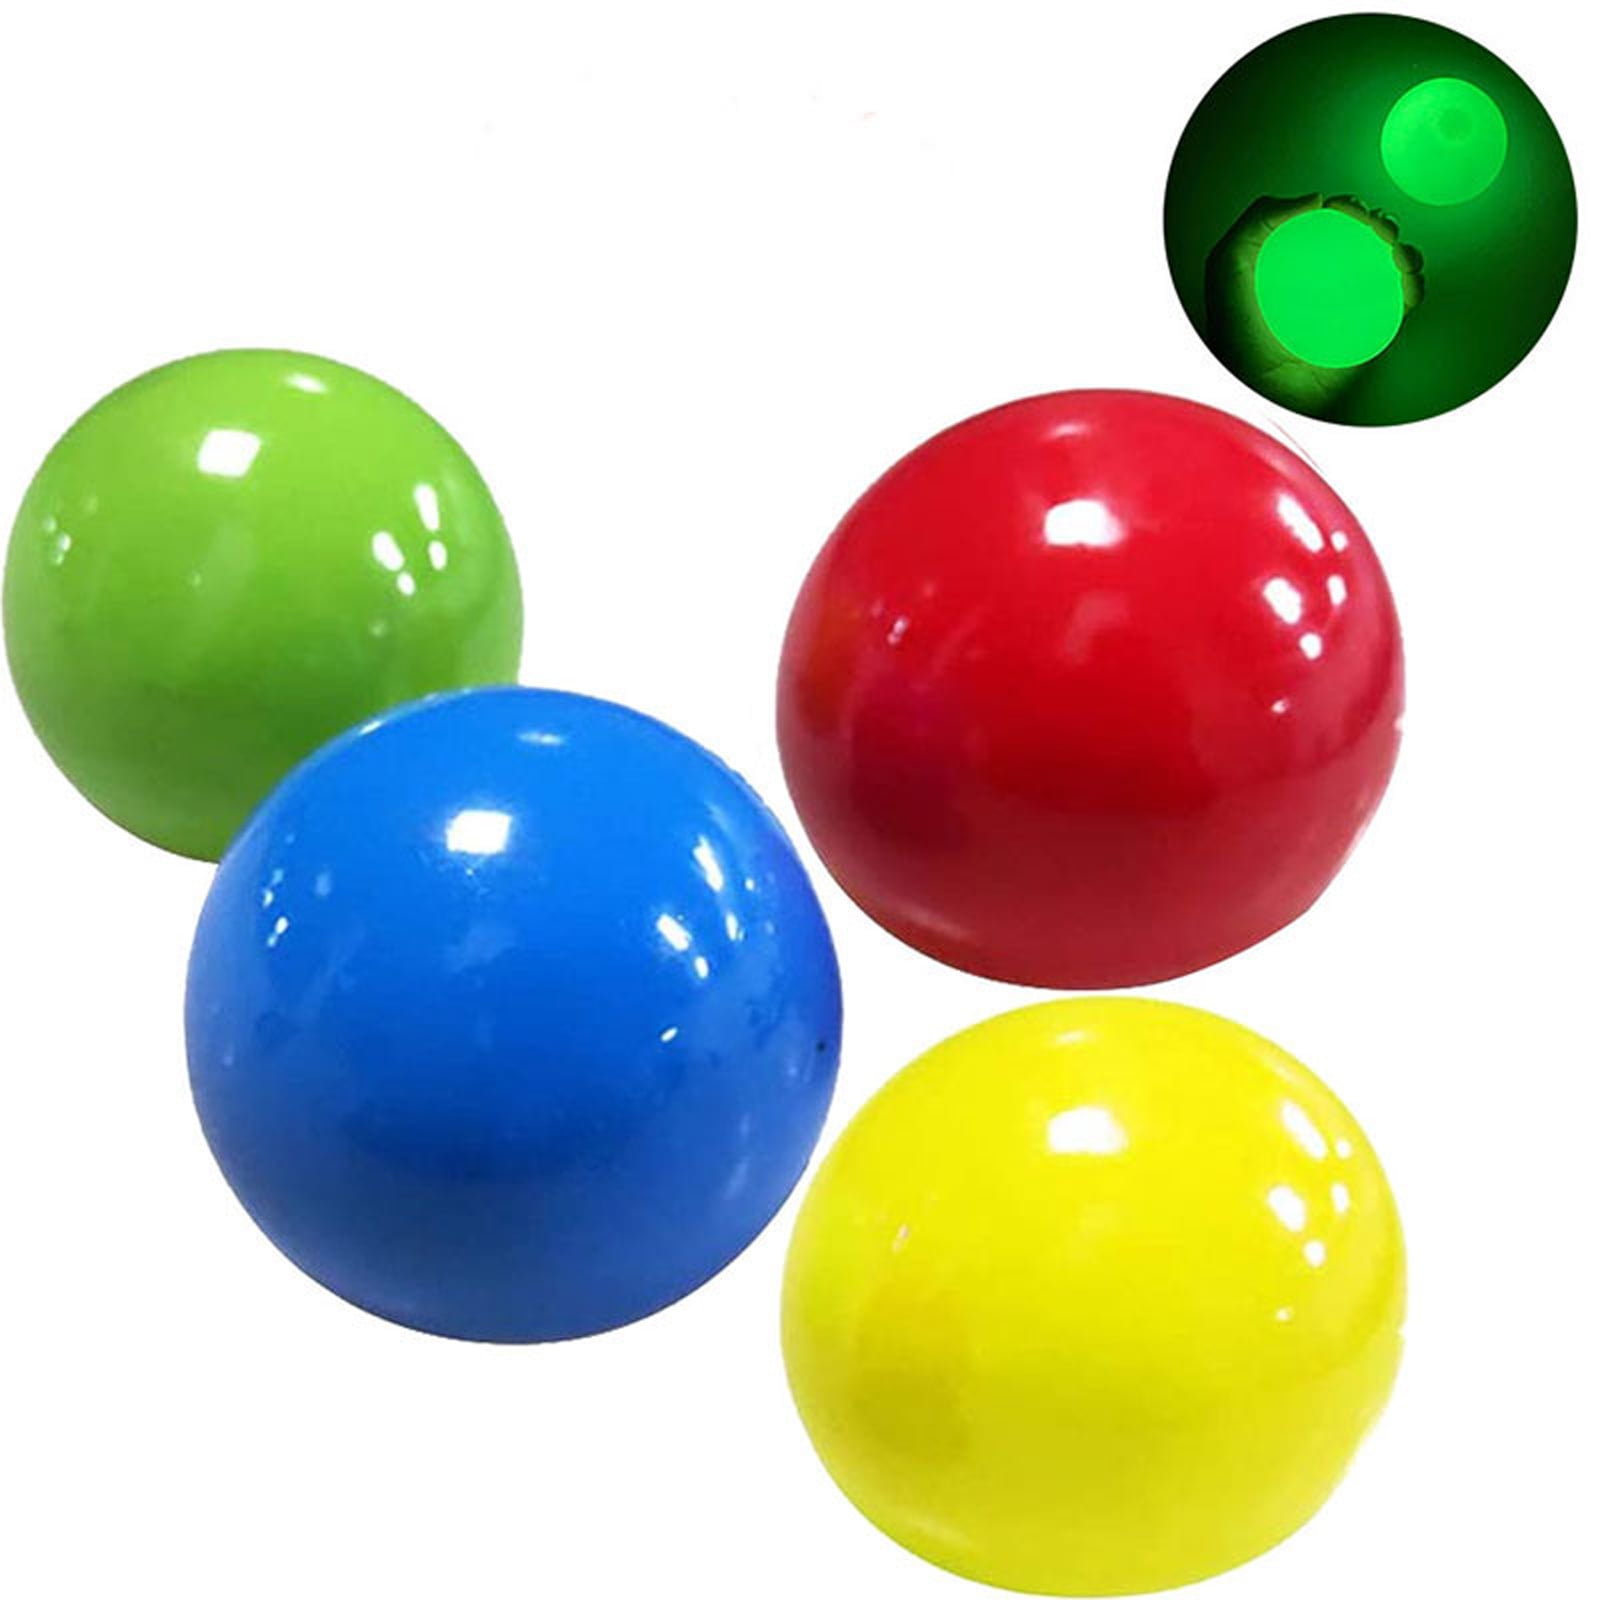 45mm luminescent Stiky Balls Throw At Ceiling Stick Wall Target Ball Kids toys 